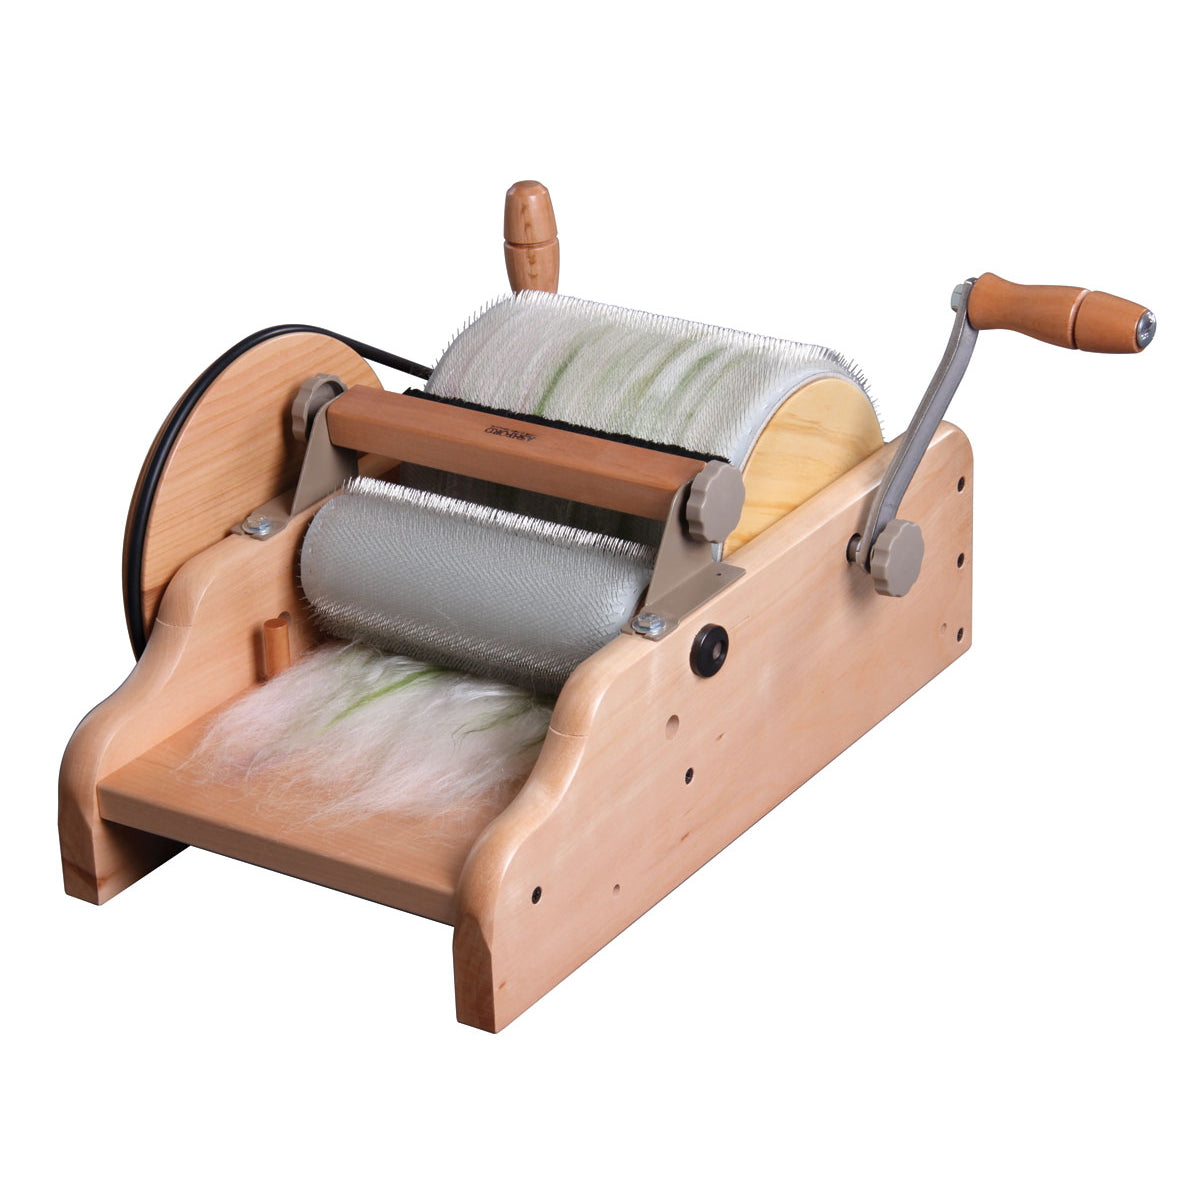 Three Key Features of a Clemes & Clemes Drum Carder